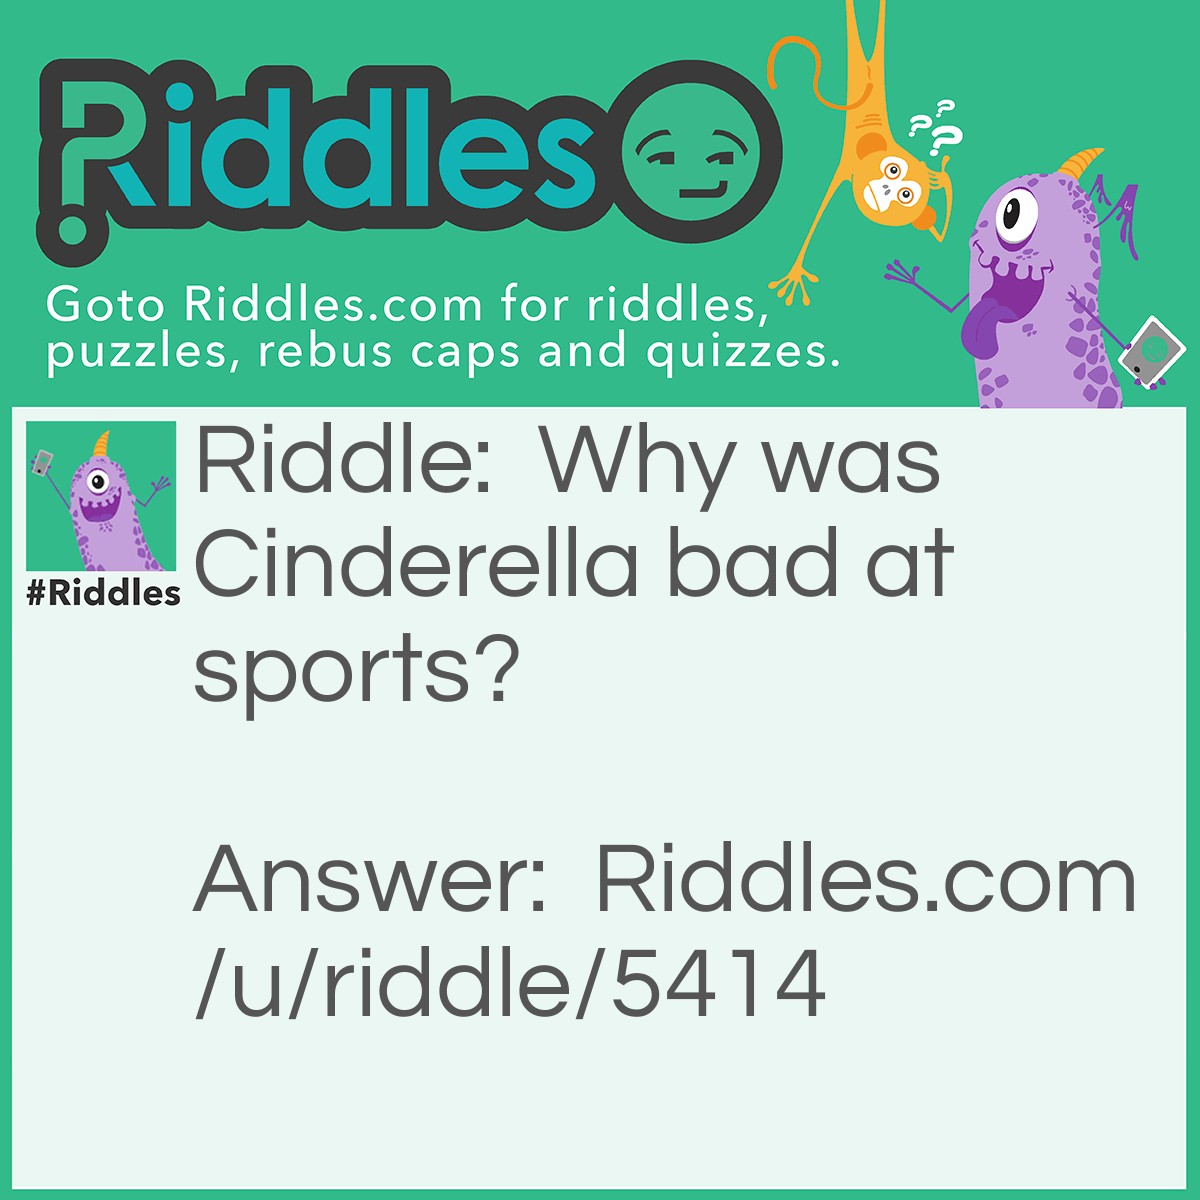 Riddle: Why was Cinderella bad at sports? Answer: Because she had a pumpkin as a coach, and ran away from the ball.